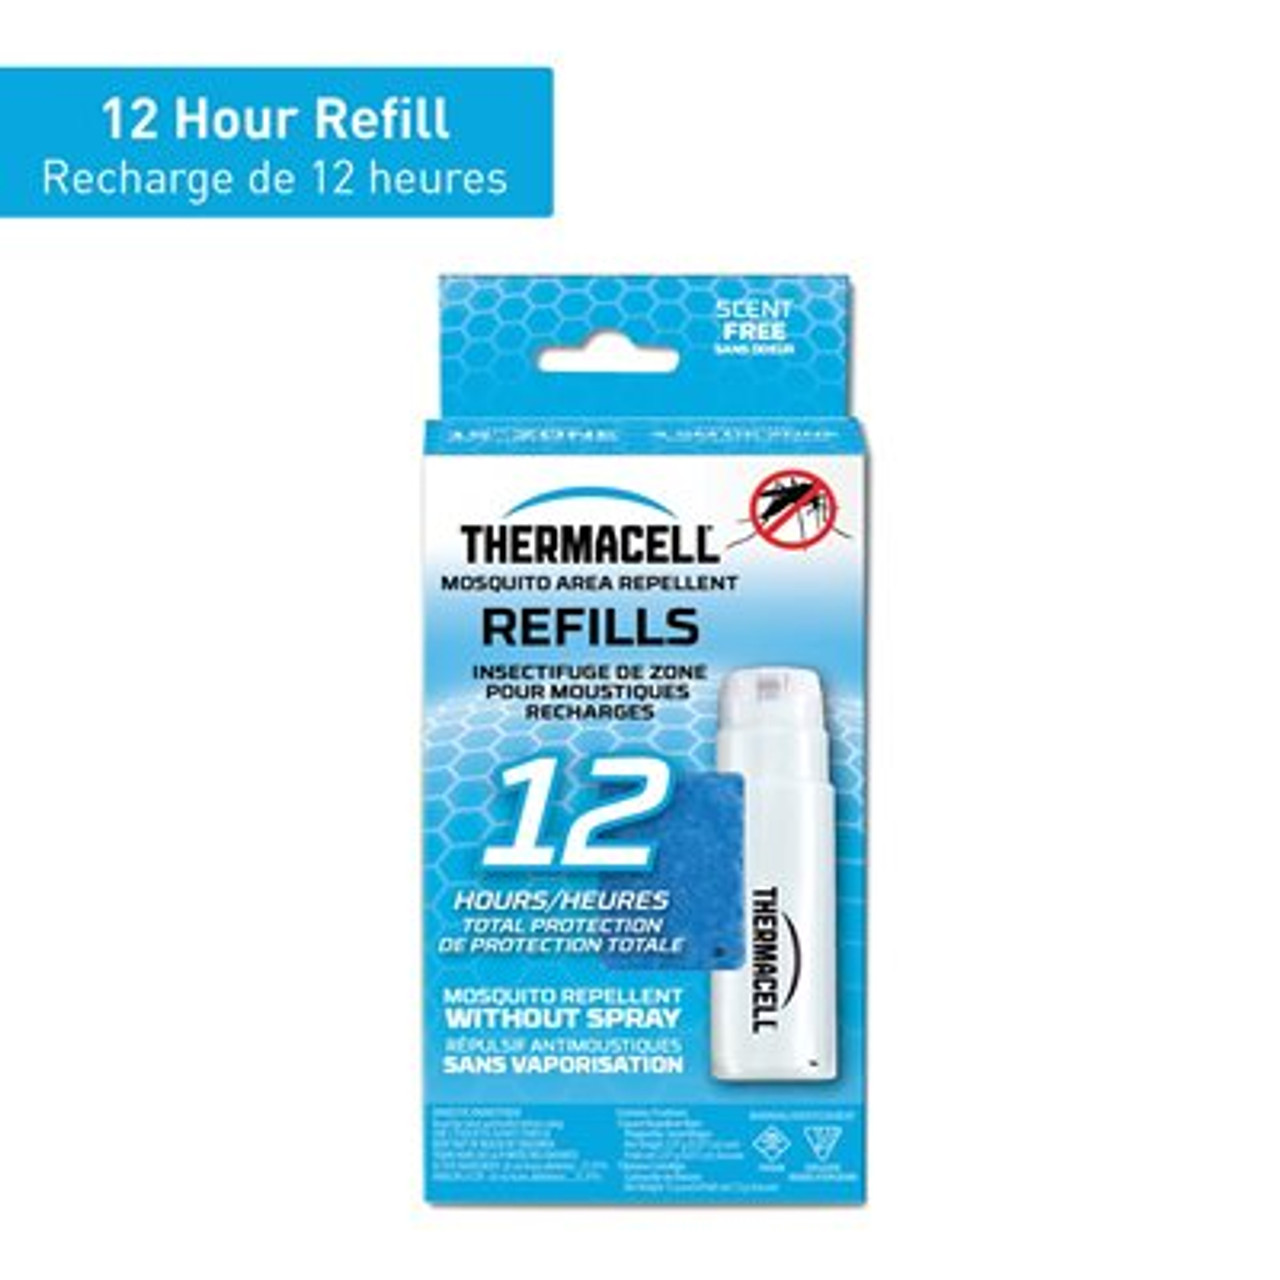 Thermacell Original Mosquito 12 Hour Repellent Refills